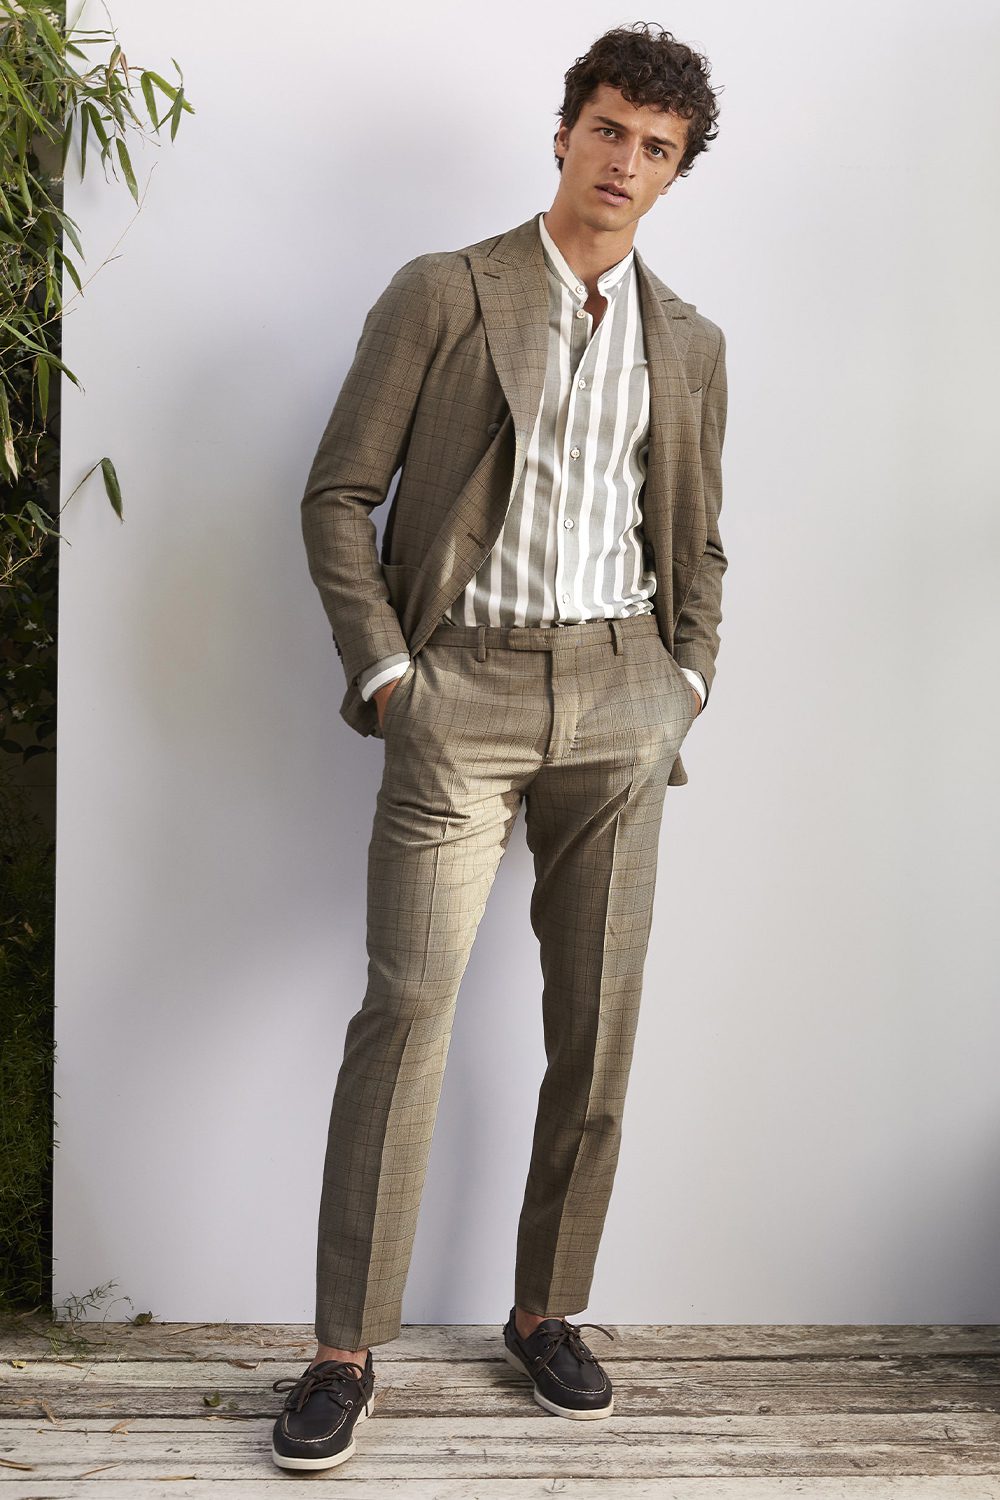 Smart Casual Dress Code For Men: Attire and Style Guide 2023